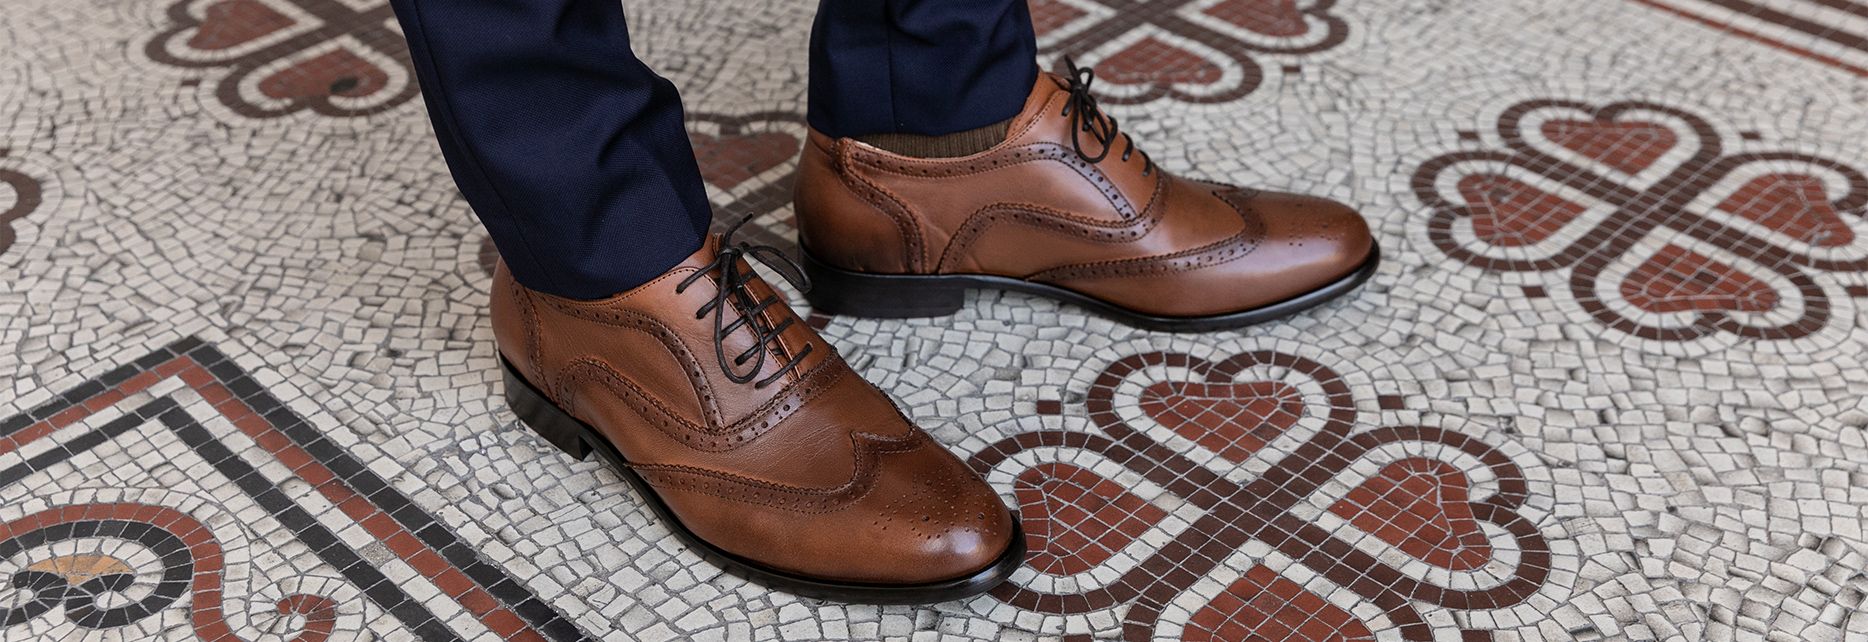 Guide To Men’s Dress Shoes